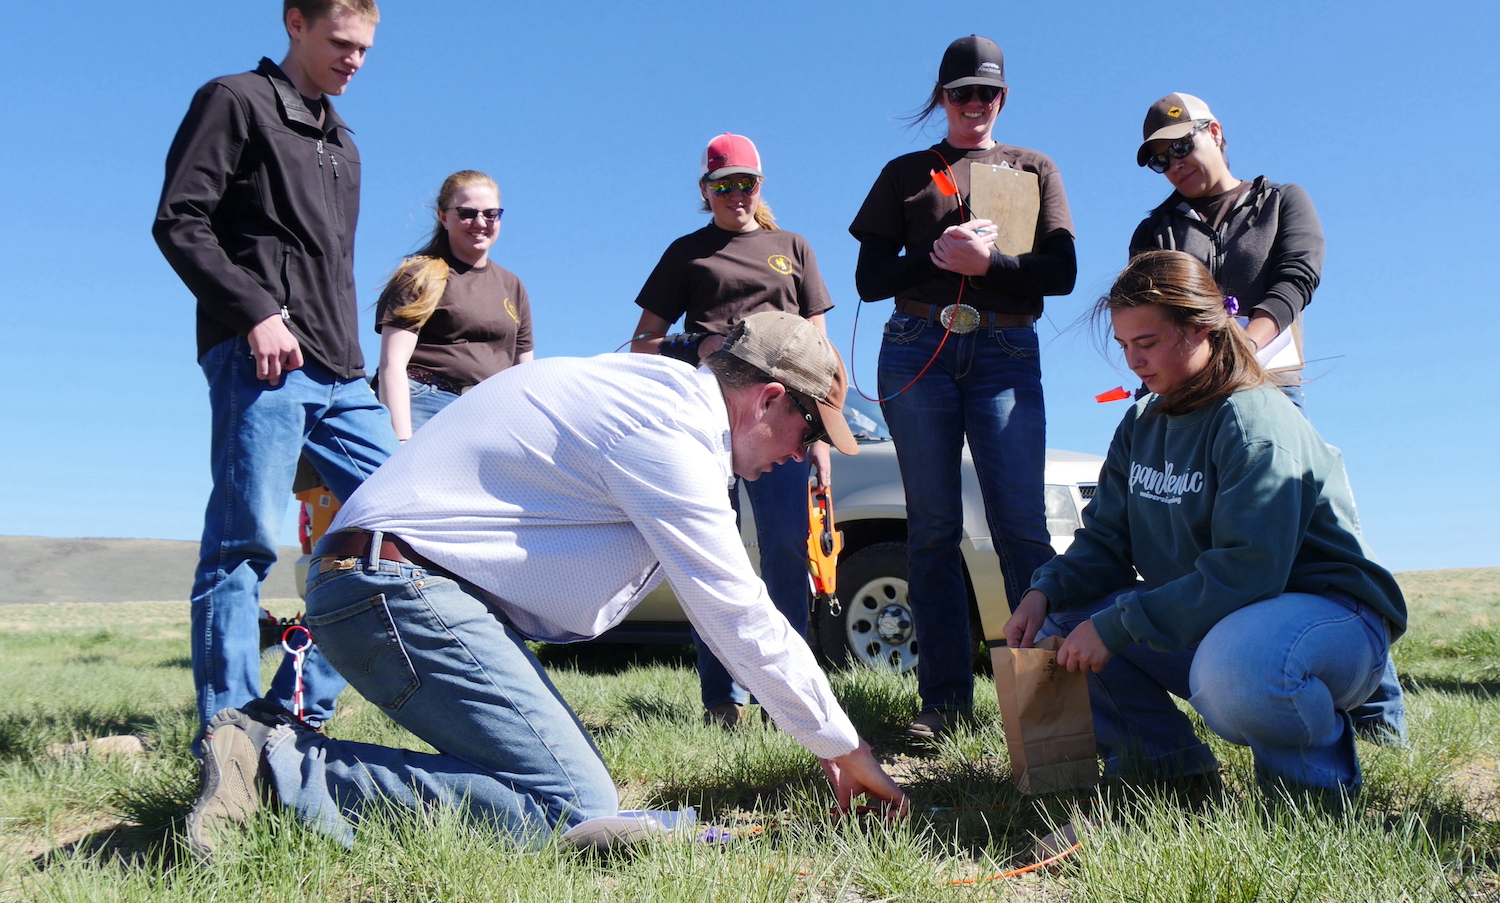 Brian Sebade, a lecturer in the UW Department of Ecosystem Science and Management, teaches a lesson on rangeland plants as part of UW Extension’s 2022 Ranch Camp at the Broadbent Ranch. (Photo by David Keto.)